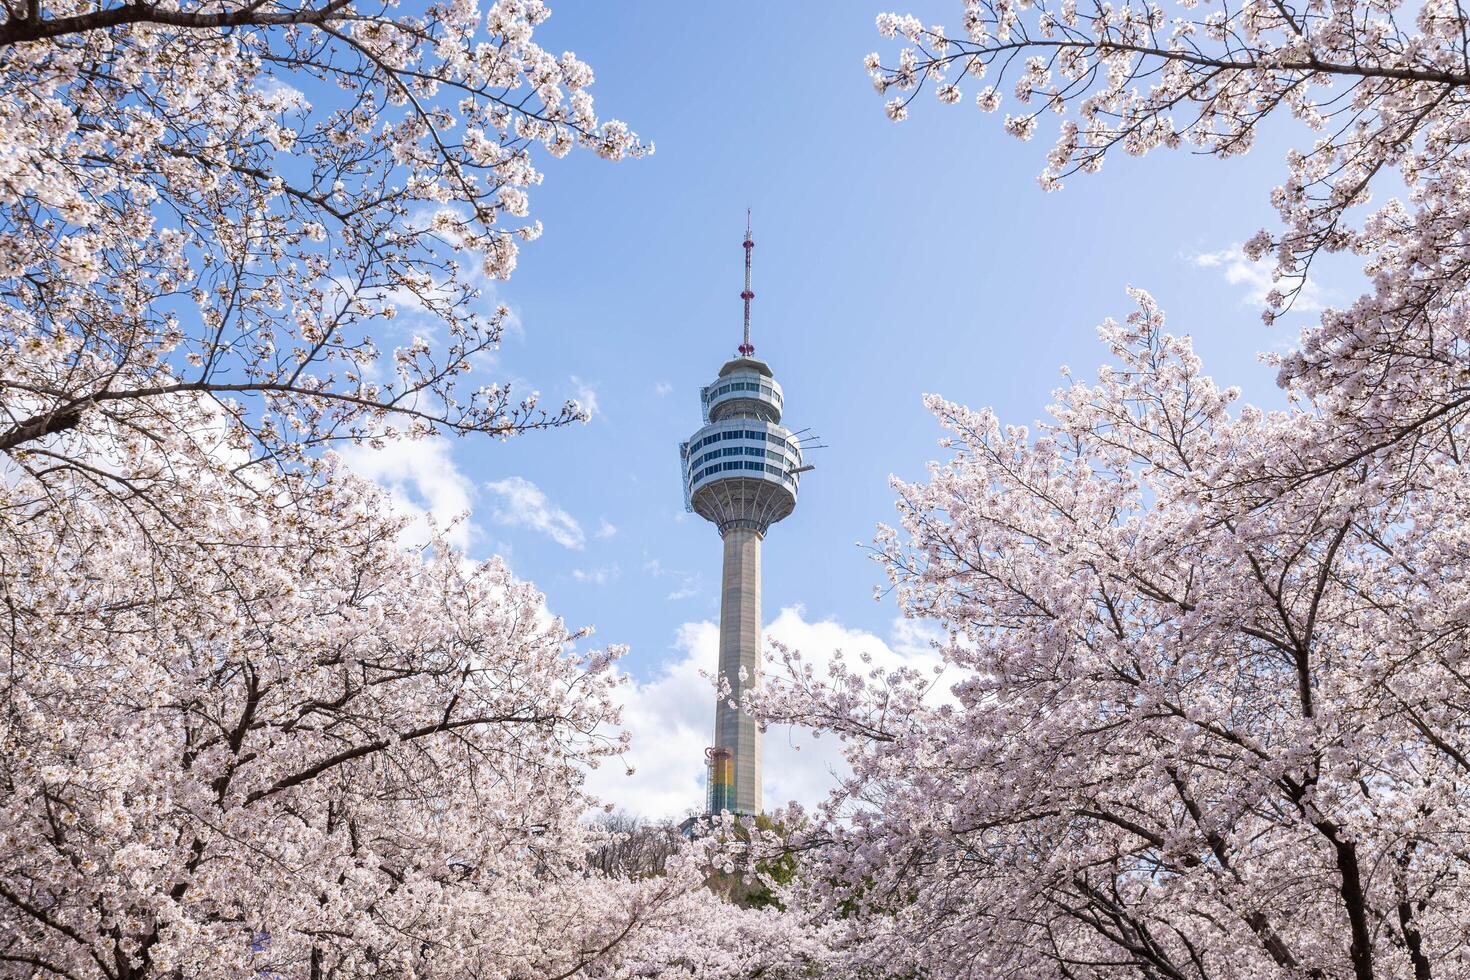 Cherry blossoms blooming in spring at E-World 83 Tower a popular tourist destination. in Daegu,South Korea. photo